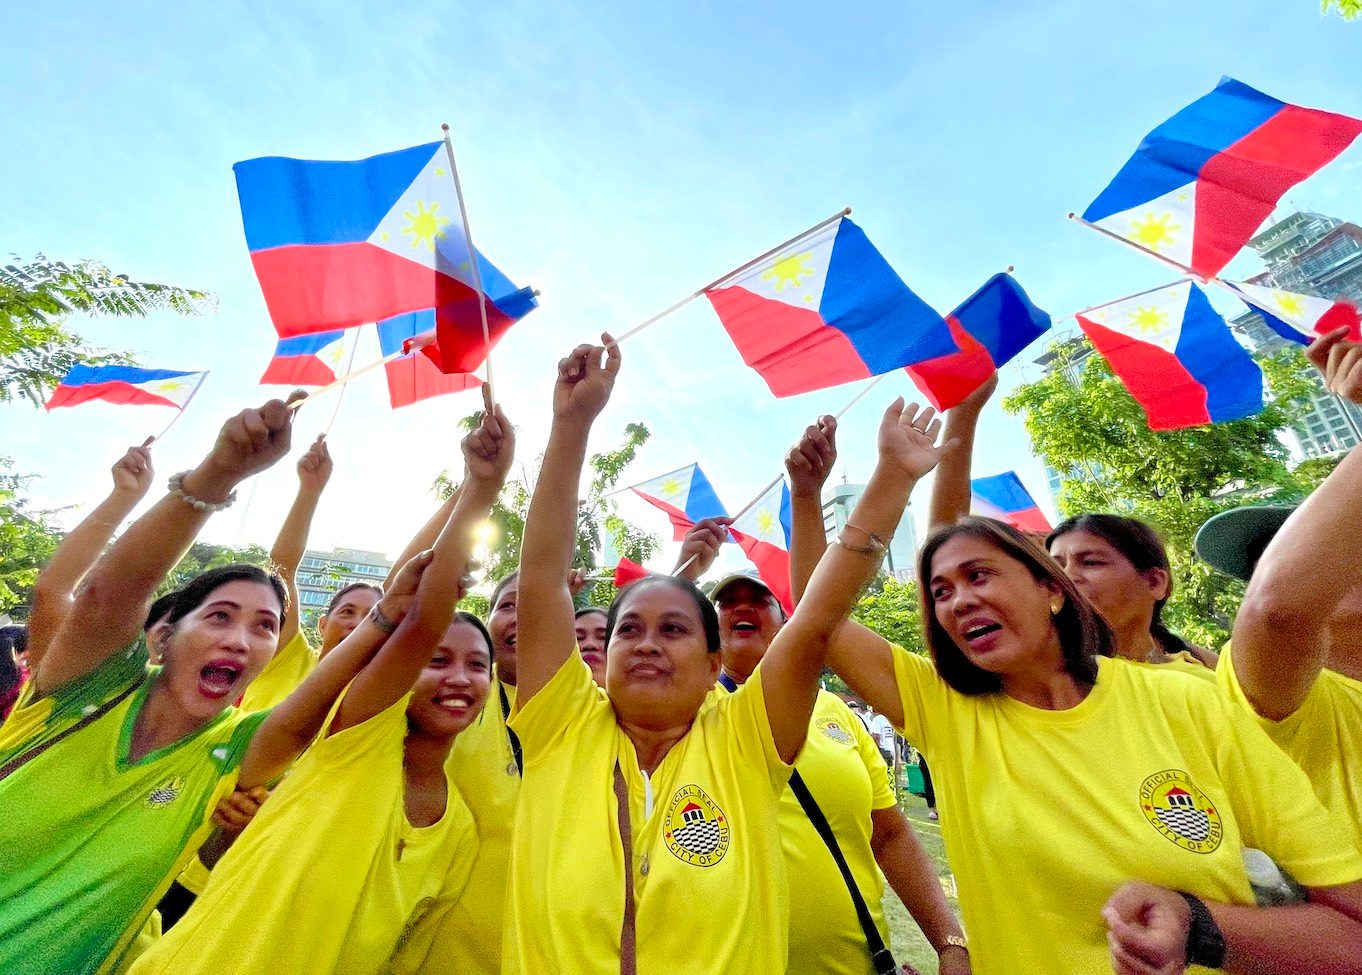 Cebu City marks Independence Day with parade, ‘Battle of Festivals’